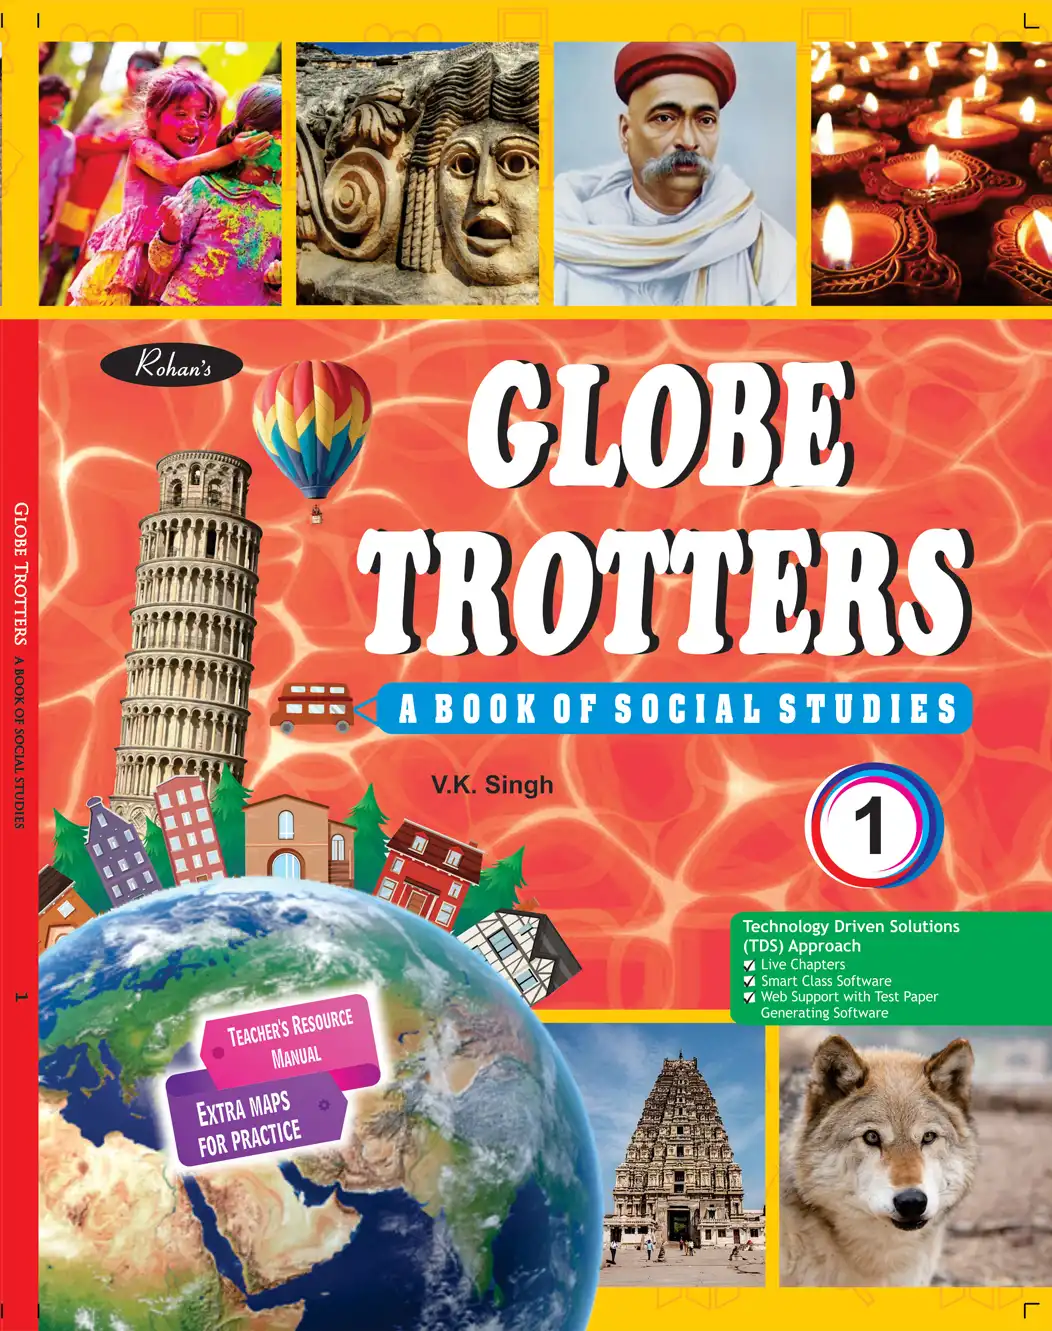 Book　of　for　Social　Studies　Class　Globe　Booksellers　Stationers　Rohan　A　Trotters　Malik